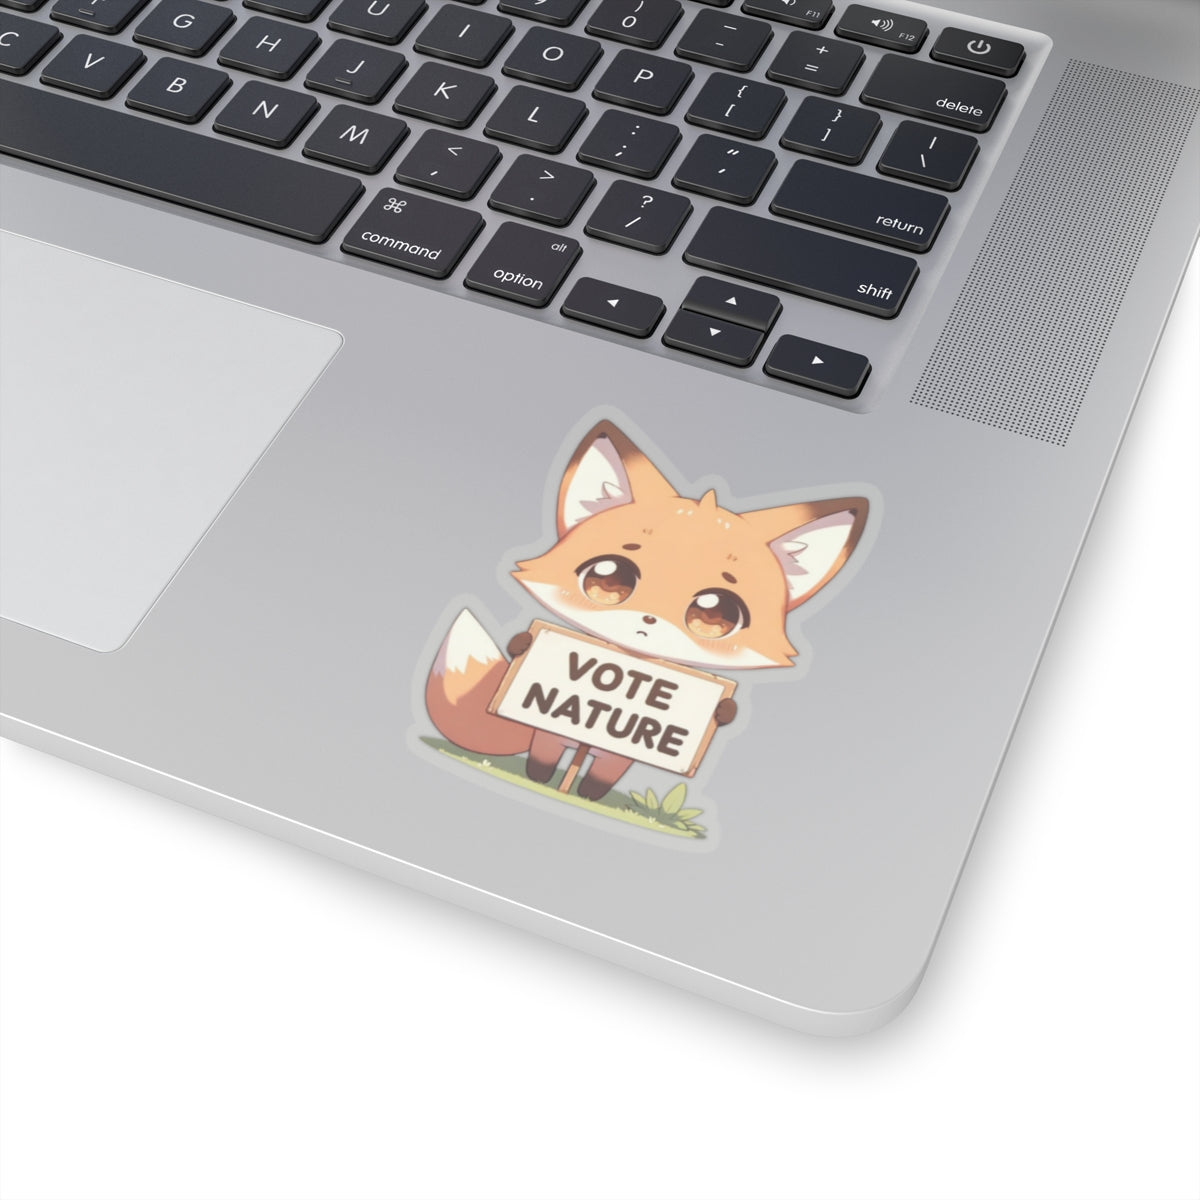 Inspirational Cute Fox Statement vinyl Sticker: Vote Nature! for laptop, kindle, phone, ipad, instrument case, notebook, mood board, or wall